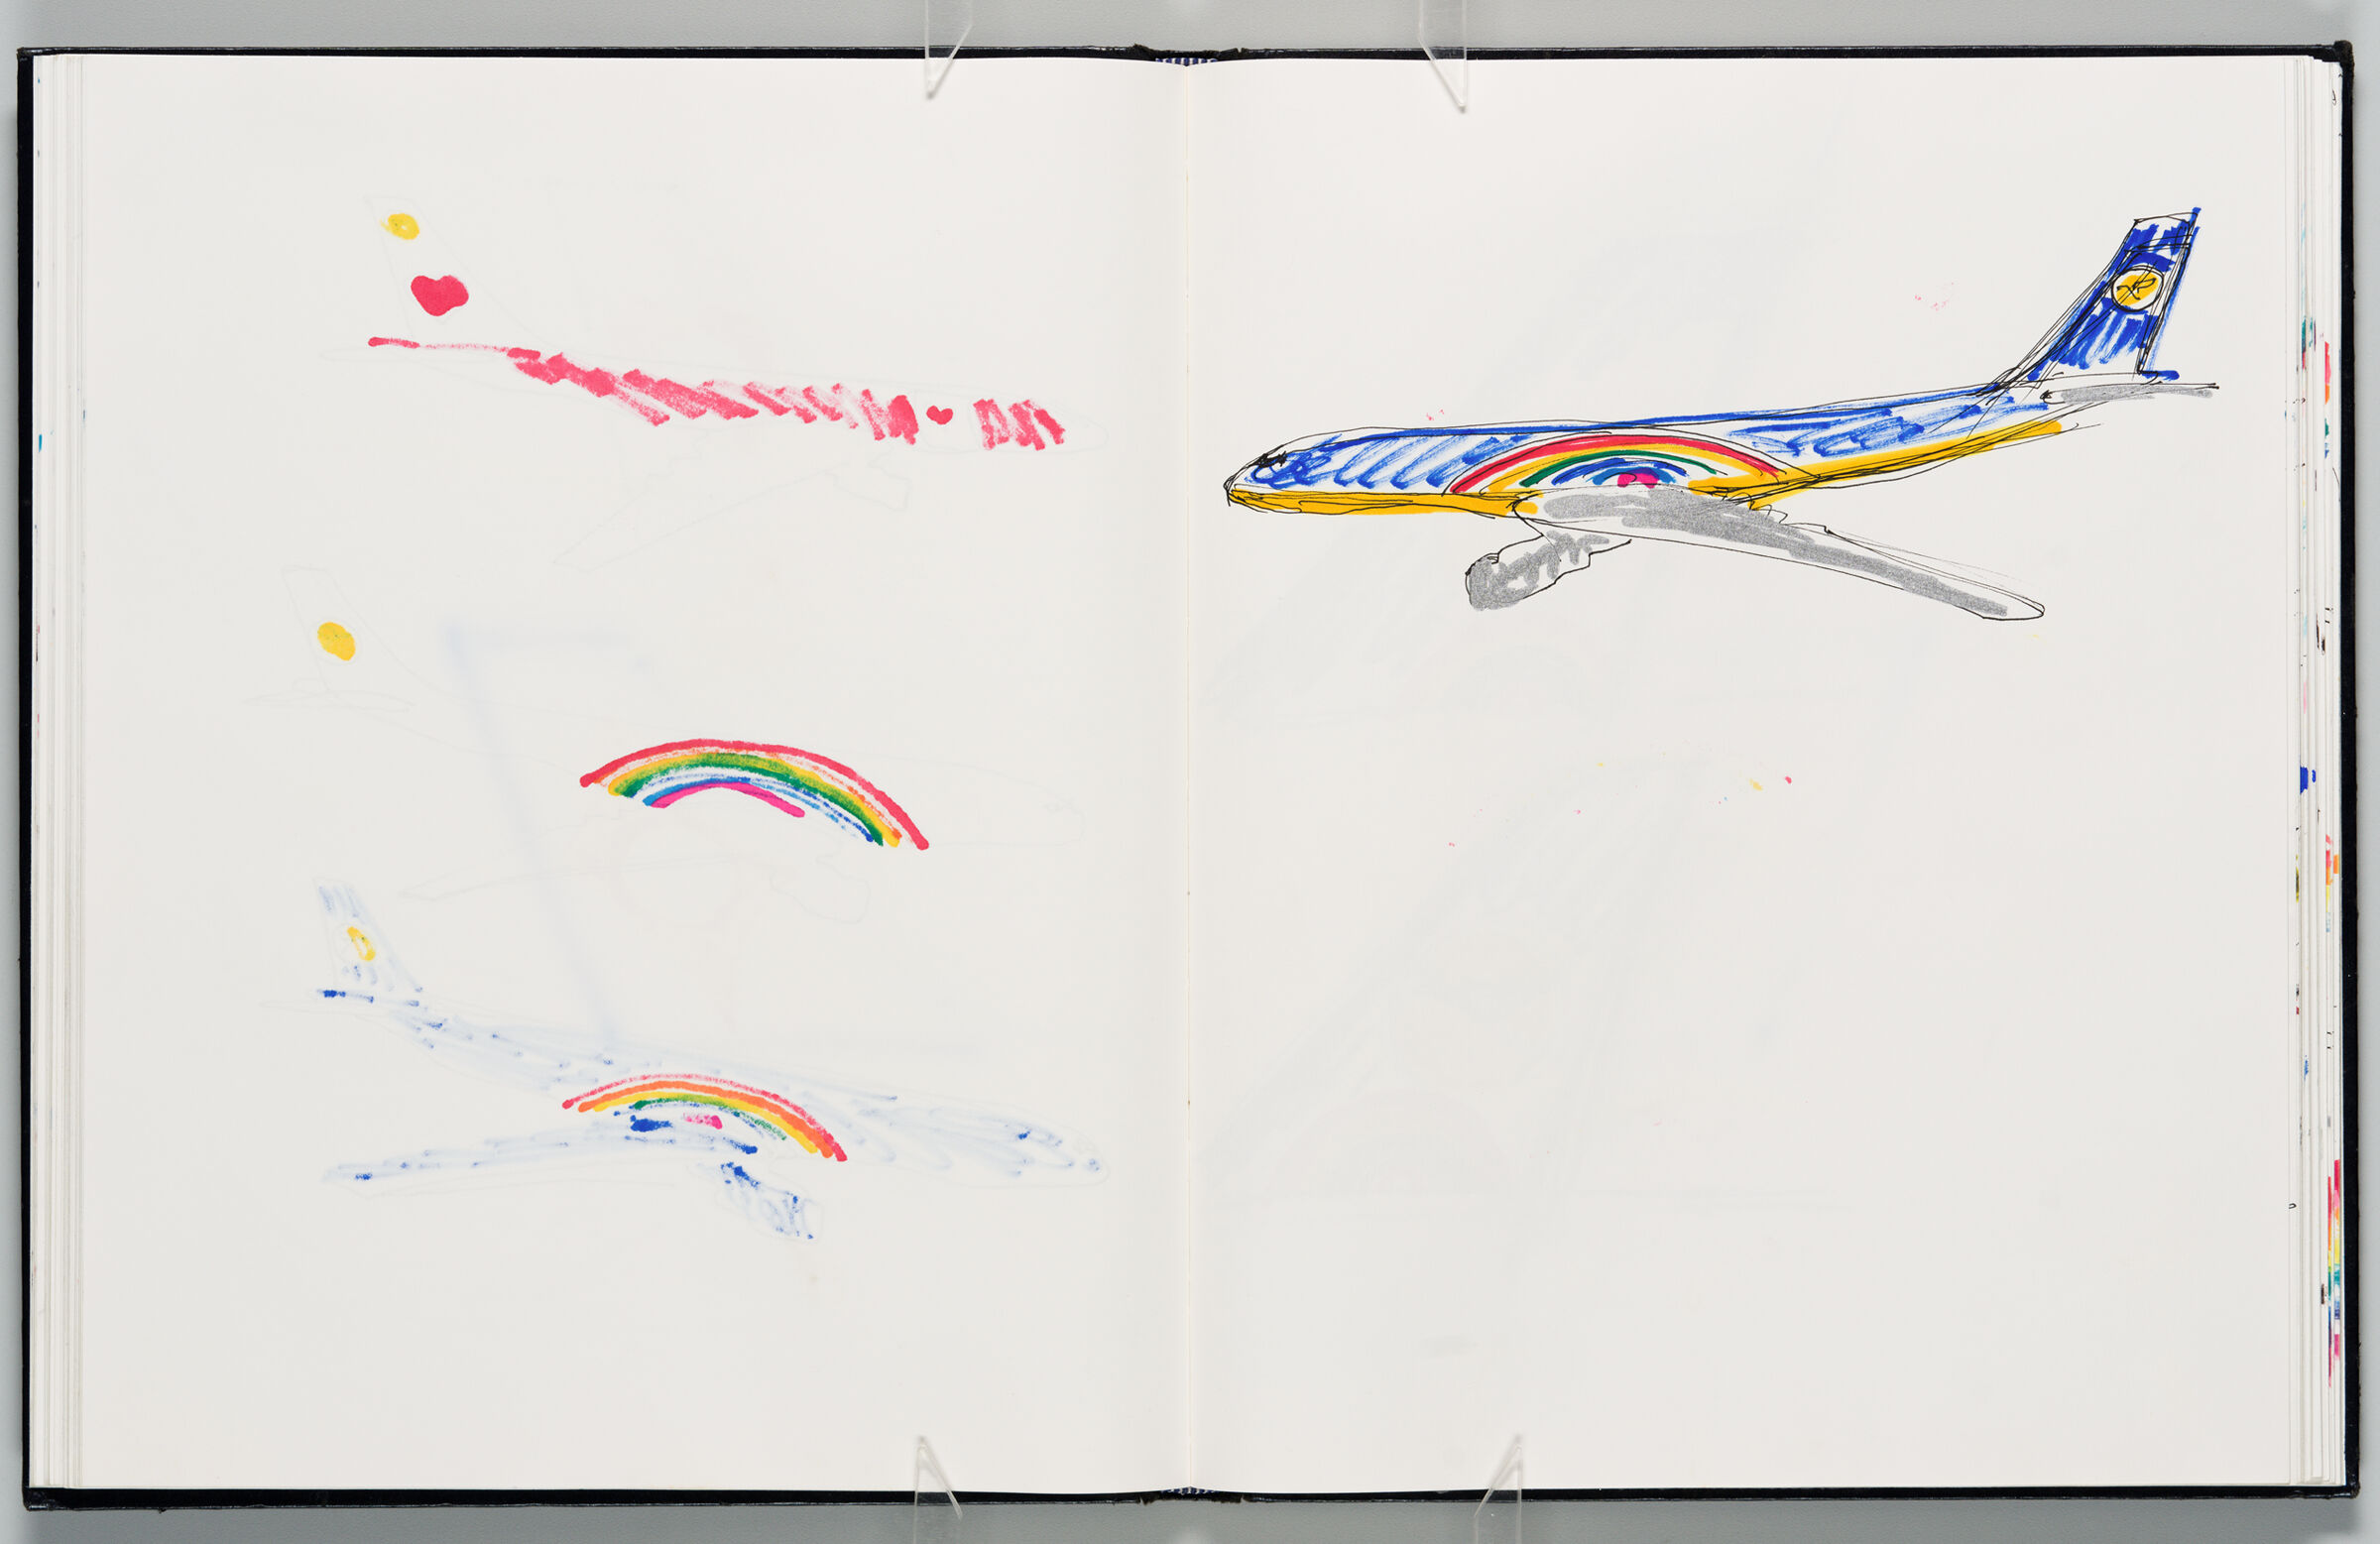 Untitled (Bleed-Through Of Previous Page, Left Page); Untitled (Rainbow Design For Condor Planes, Right Page)